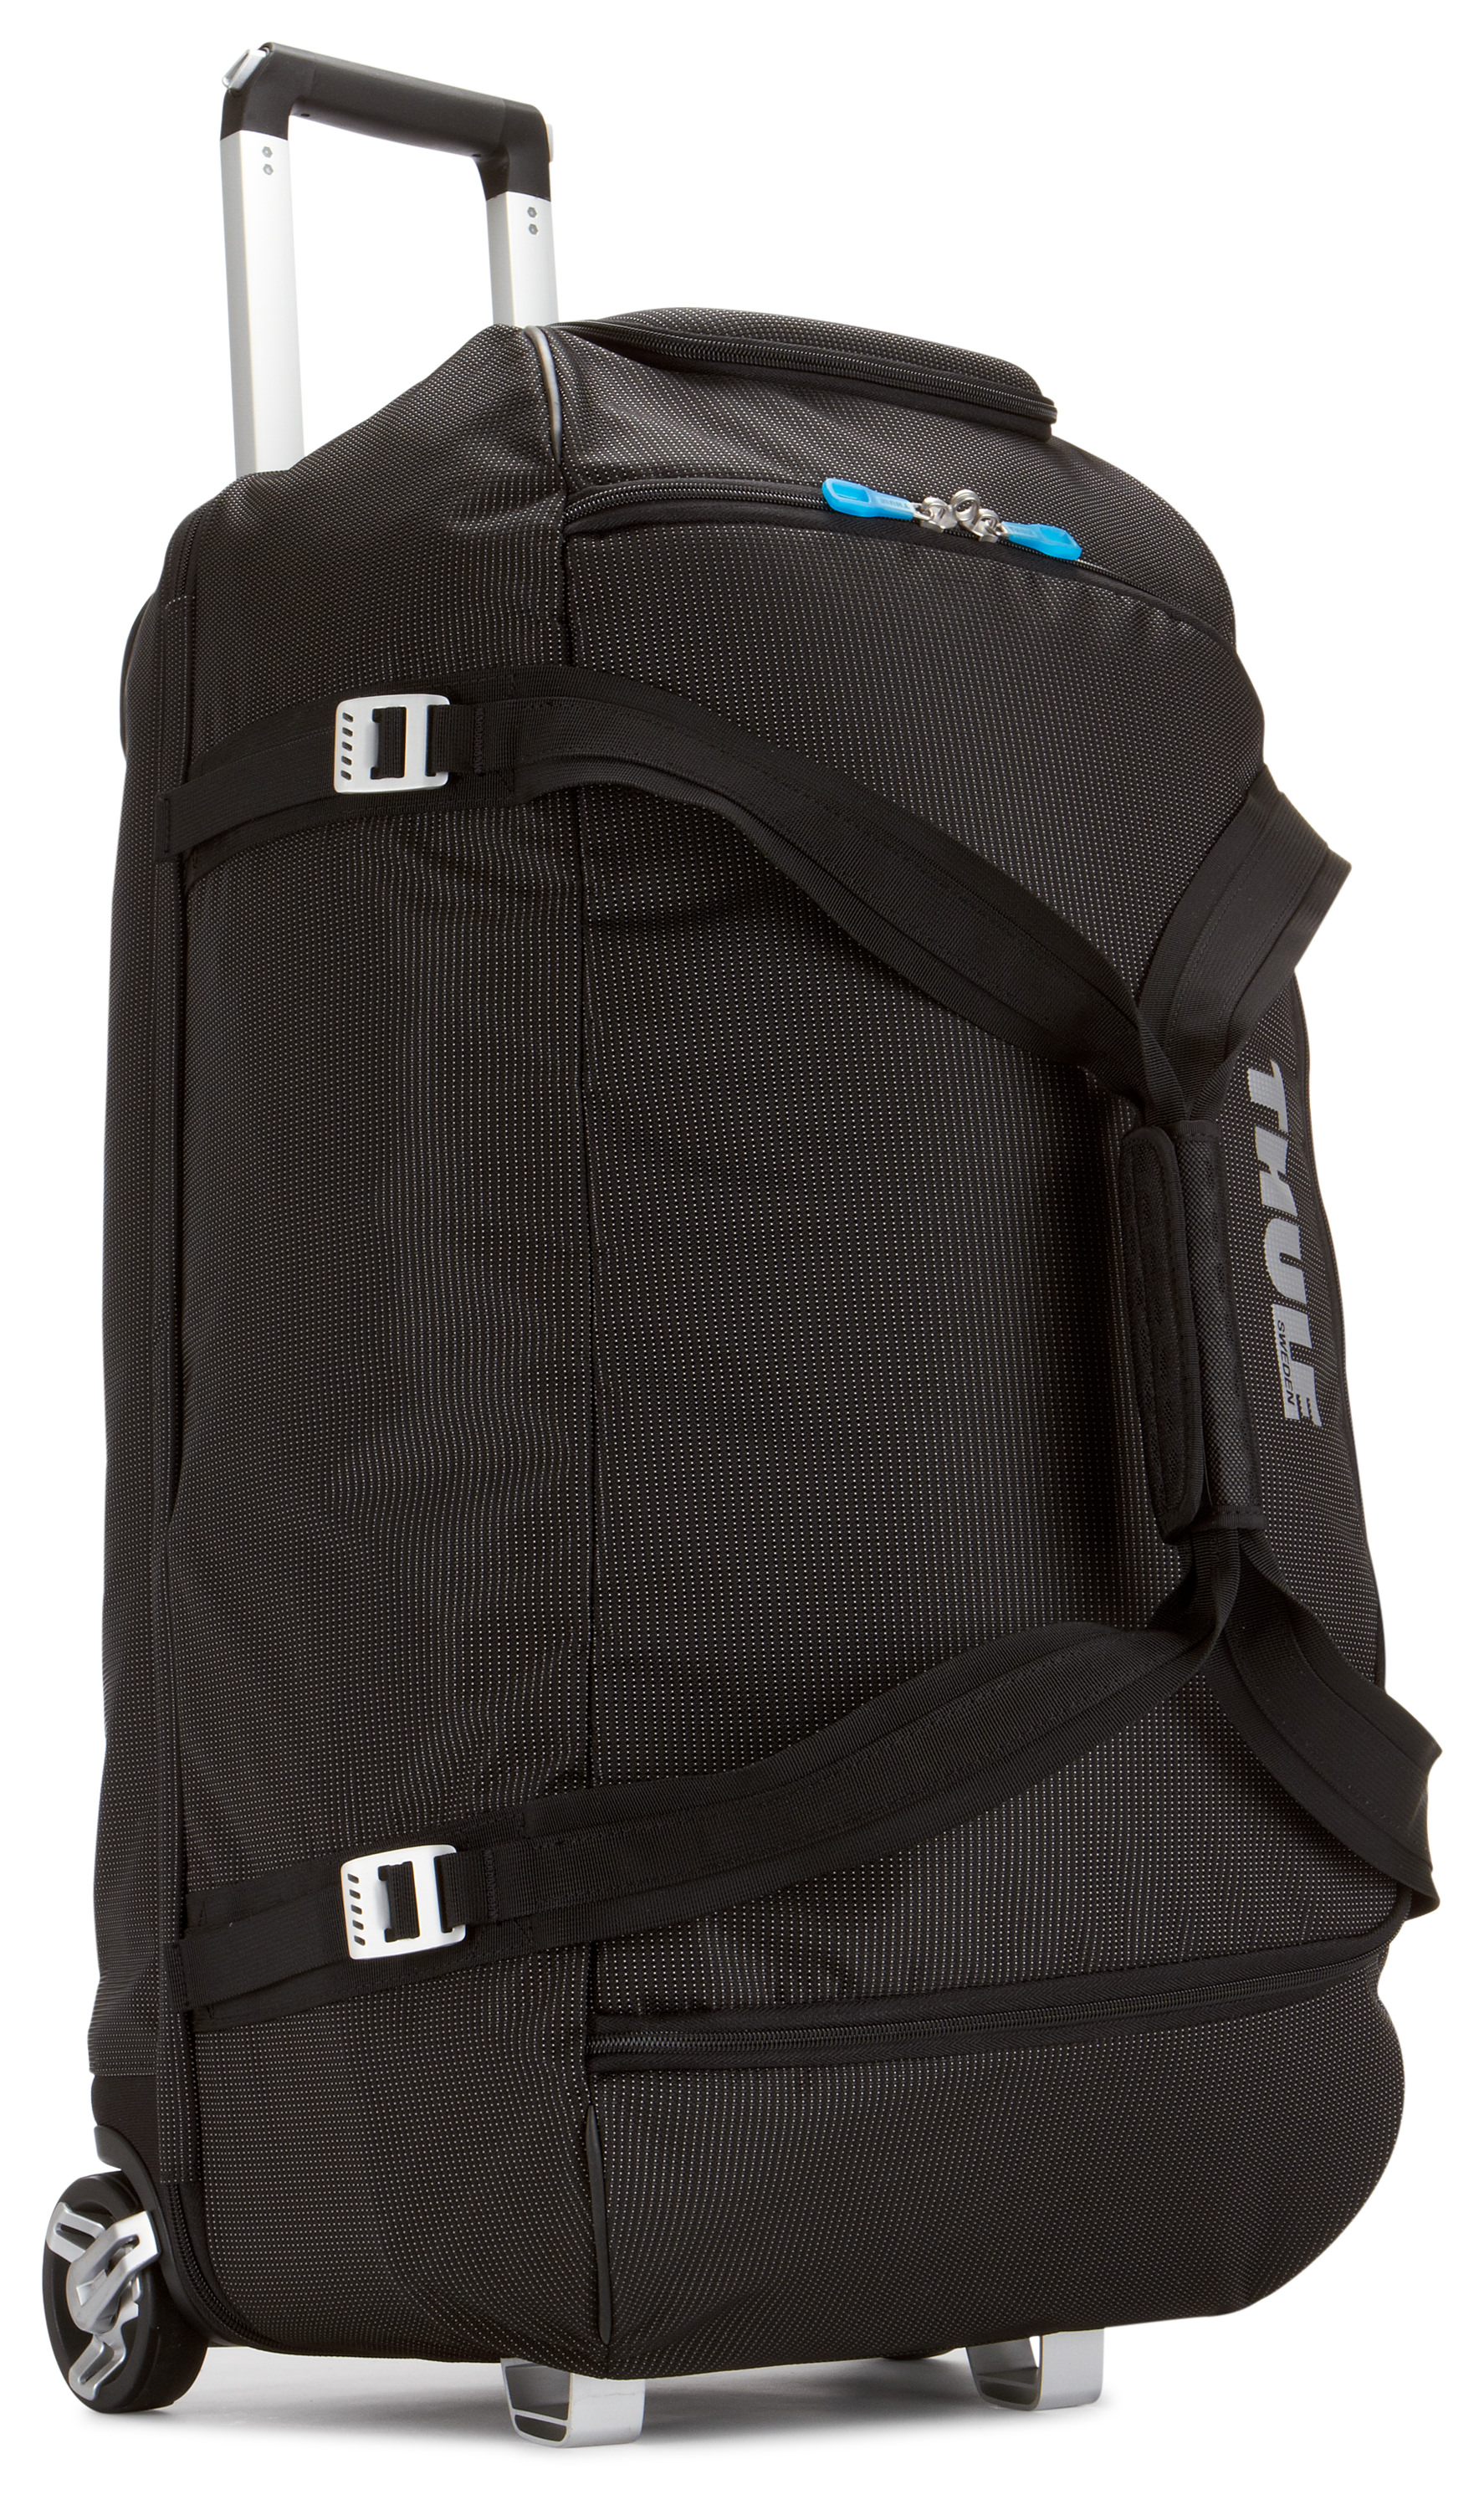 Thule Rolling Duffle Travel Bag Review | Cool Things Collection | www.semadata.org